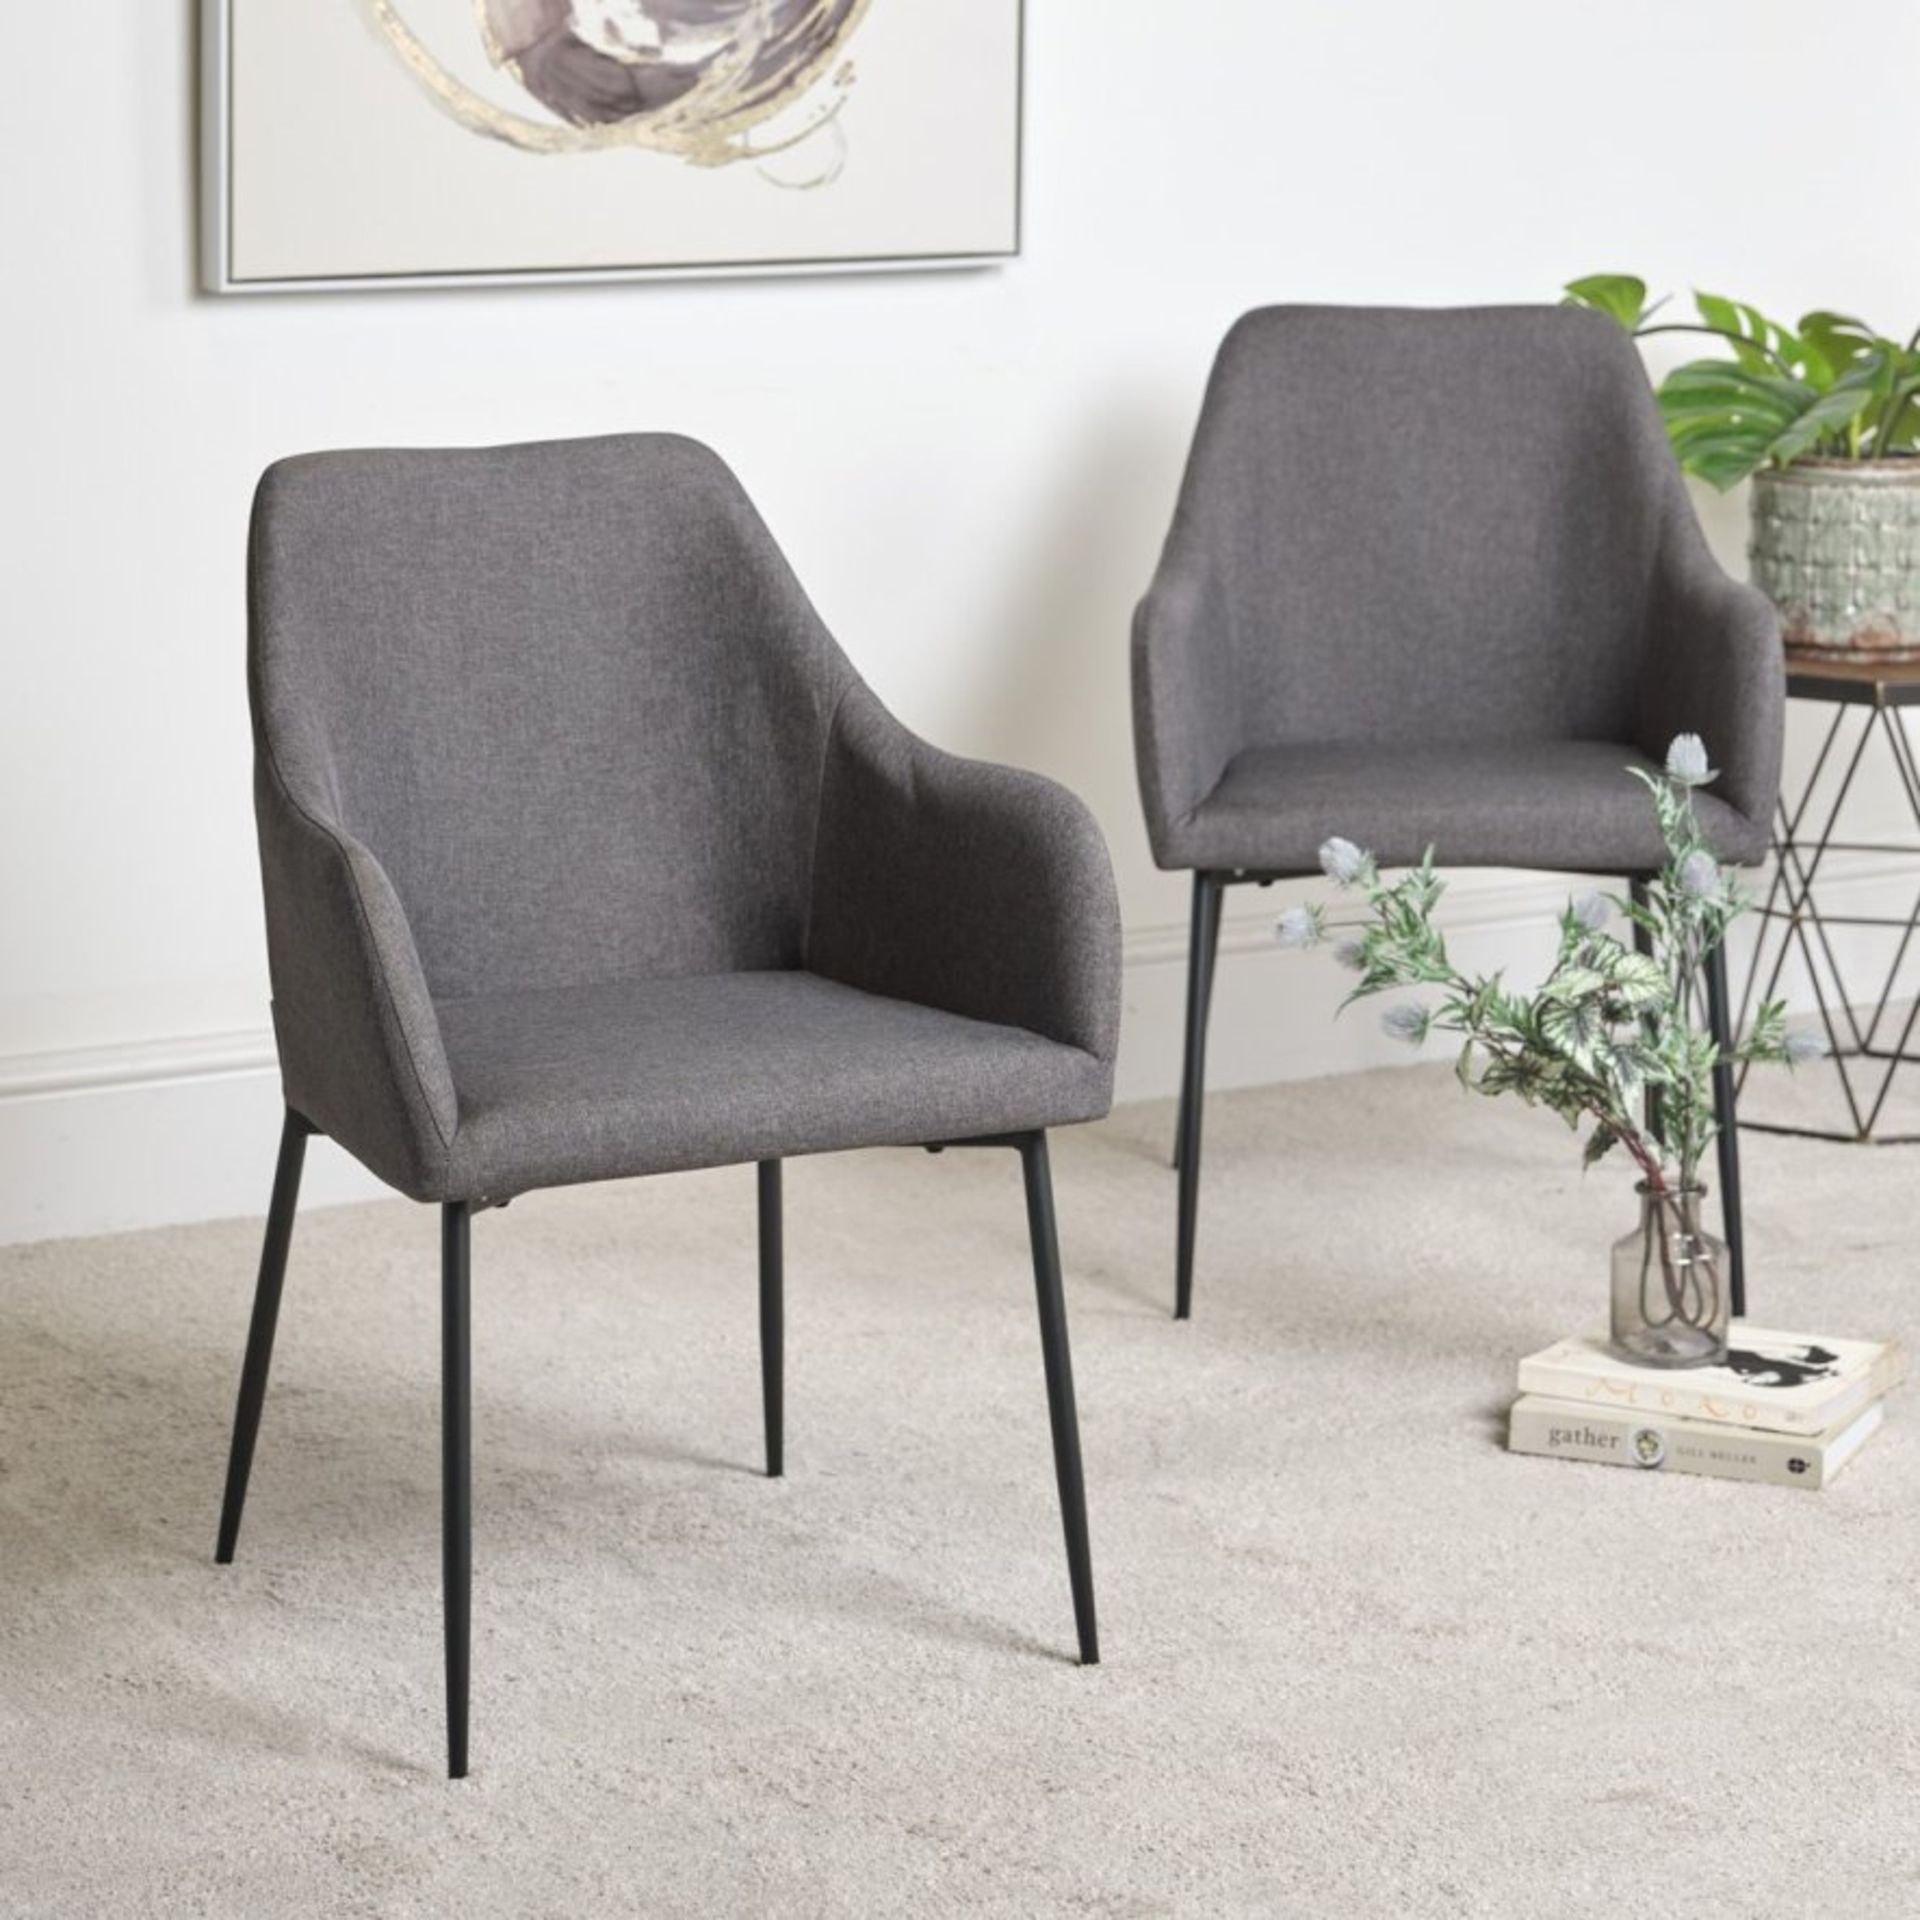 June Dining Chairs - Grey (Set of 2). RRP £289.99. - SR6. The June Dining chairs (Set of 2) in